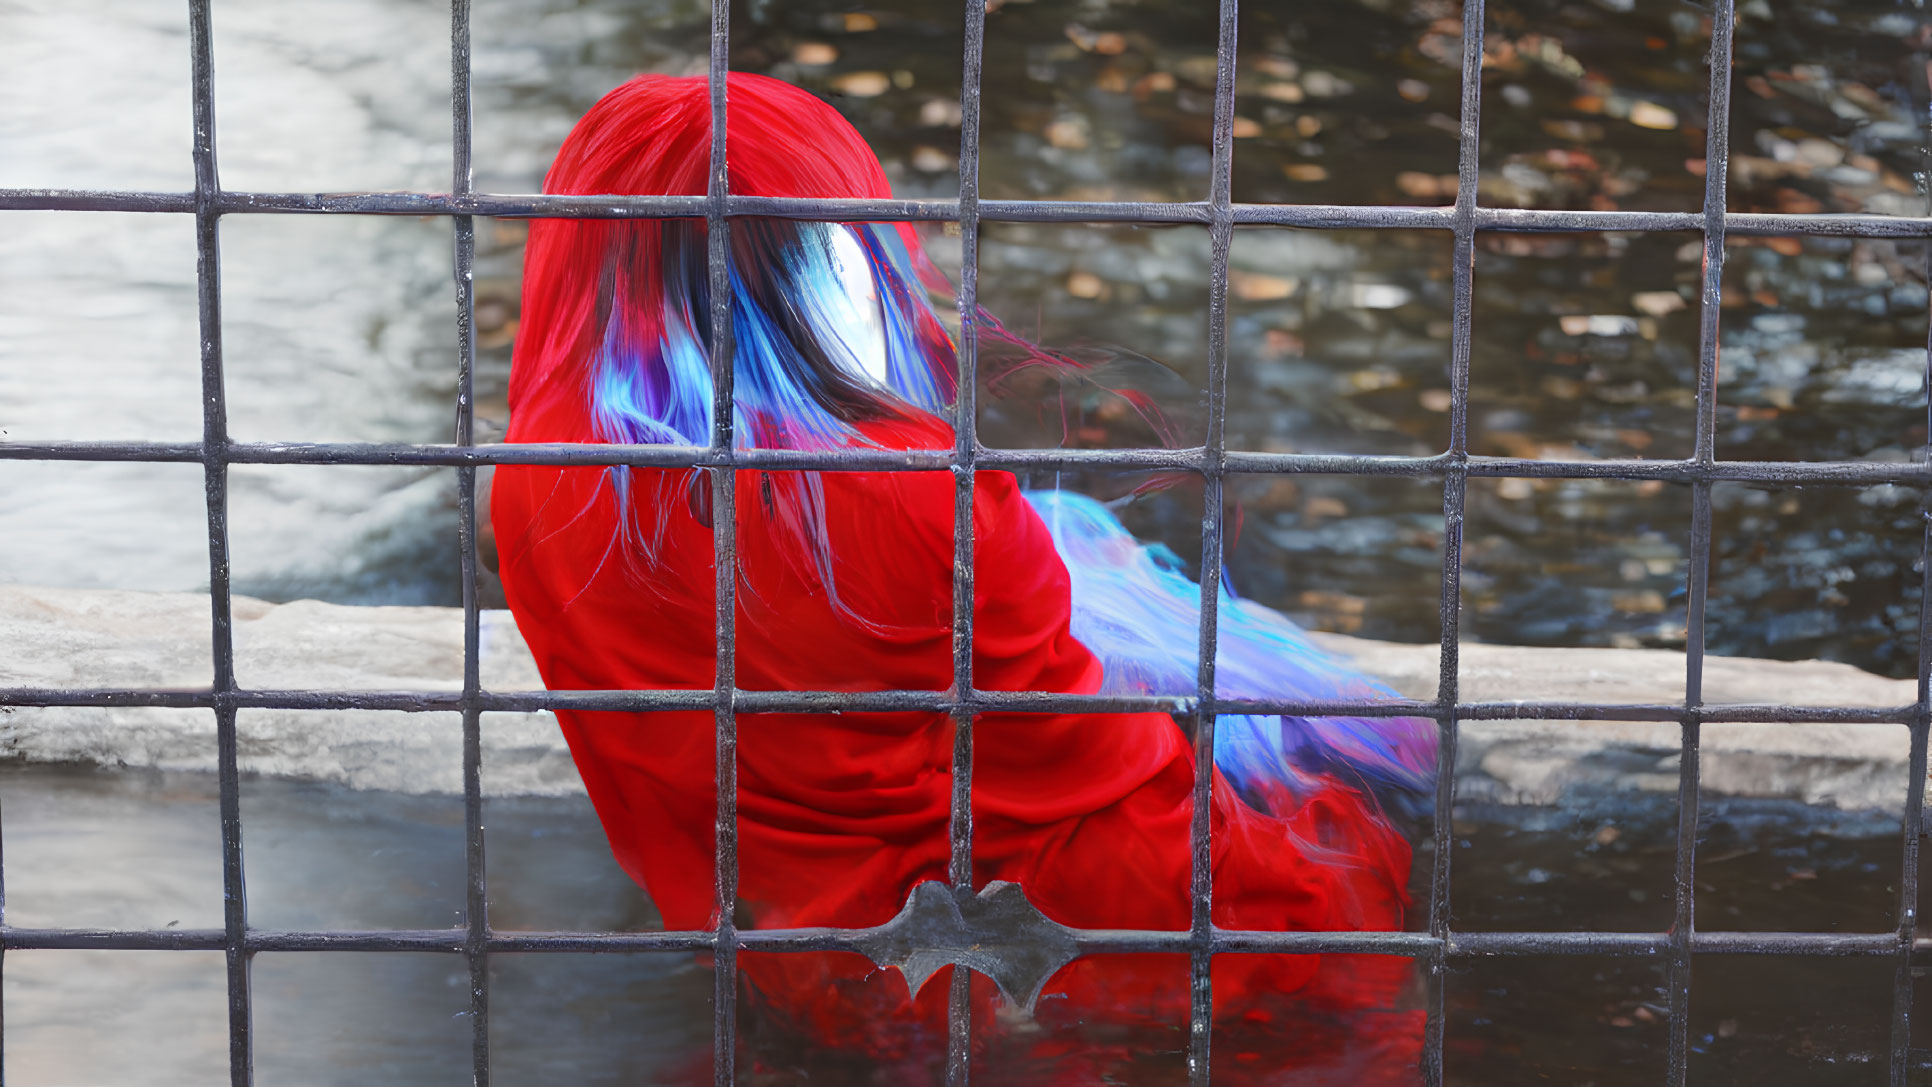 Vibrant red and blue hair person sitting by river behind black metal fence